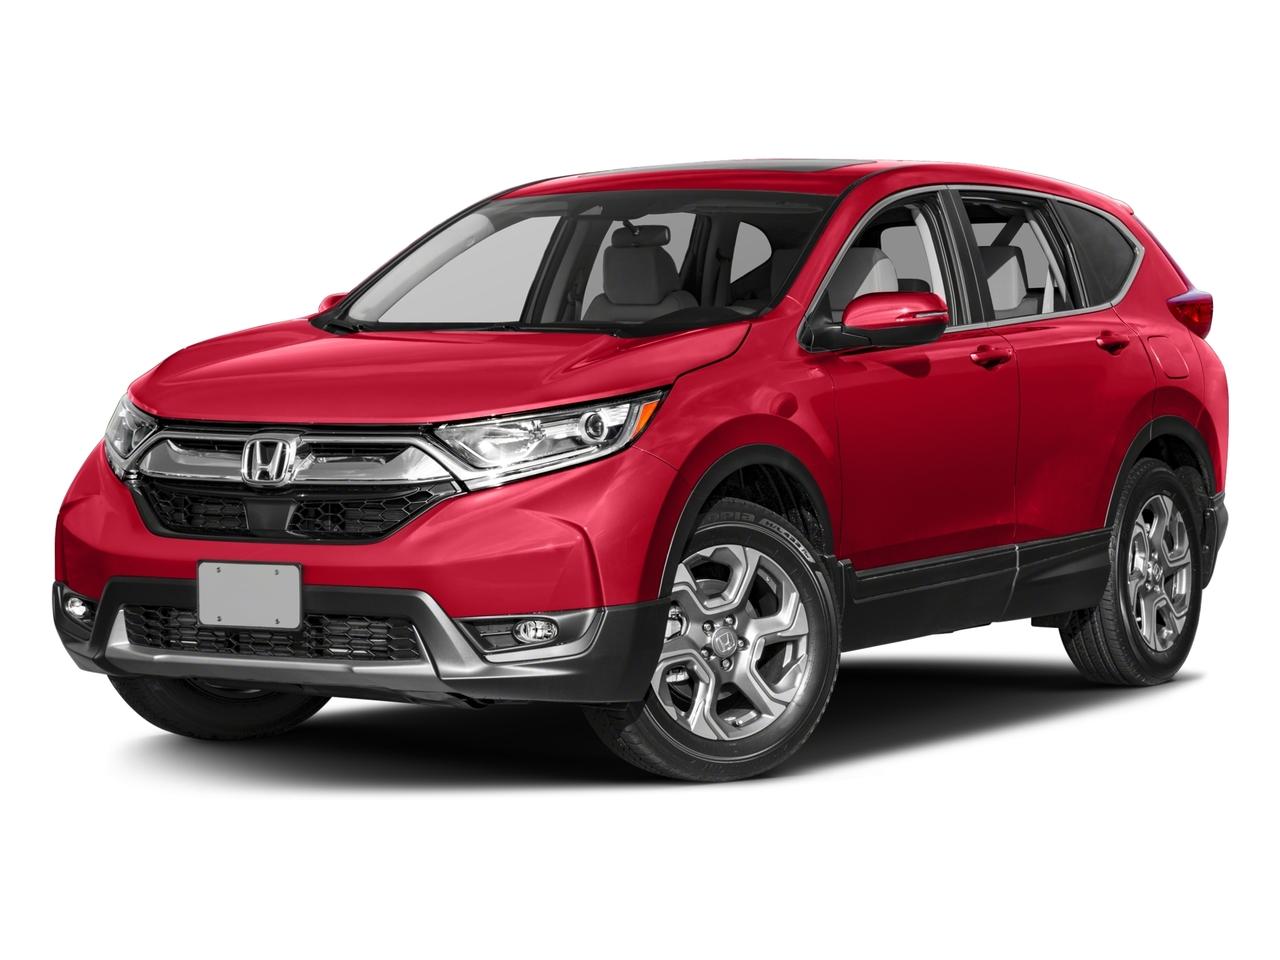 2017 Honda CR-V Vehicle Photo in Bowie, MD 20716